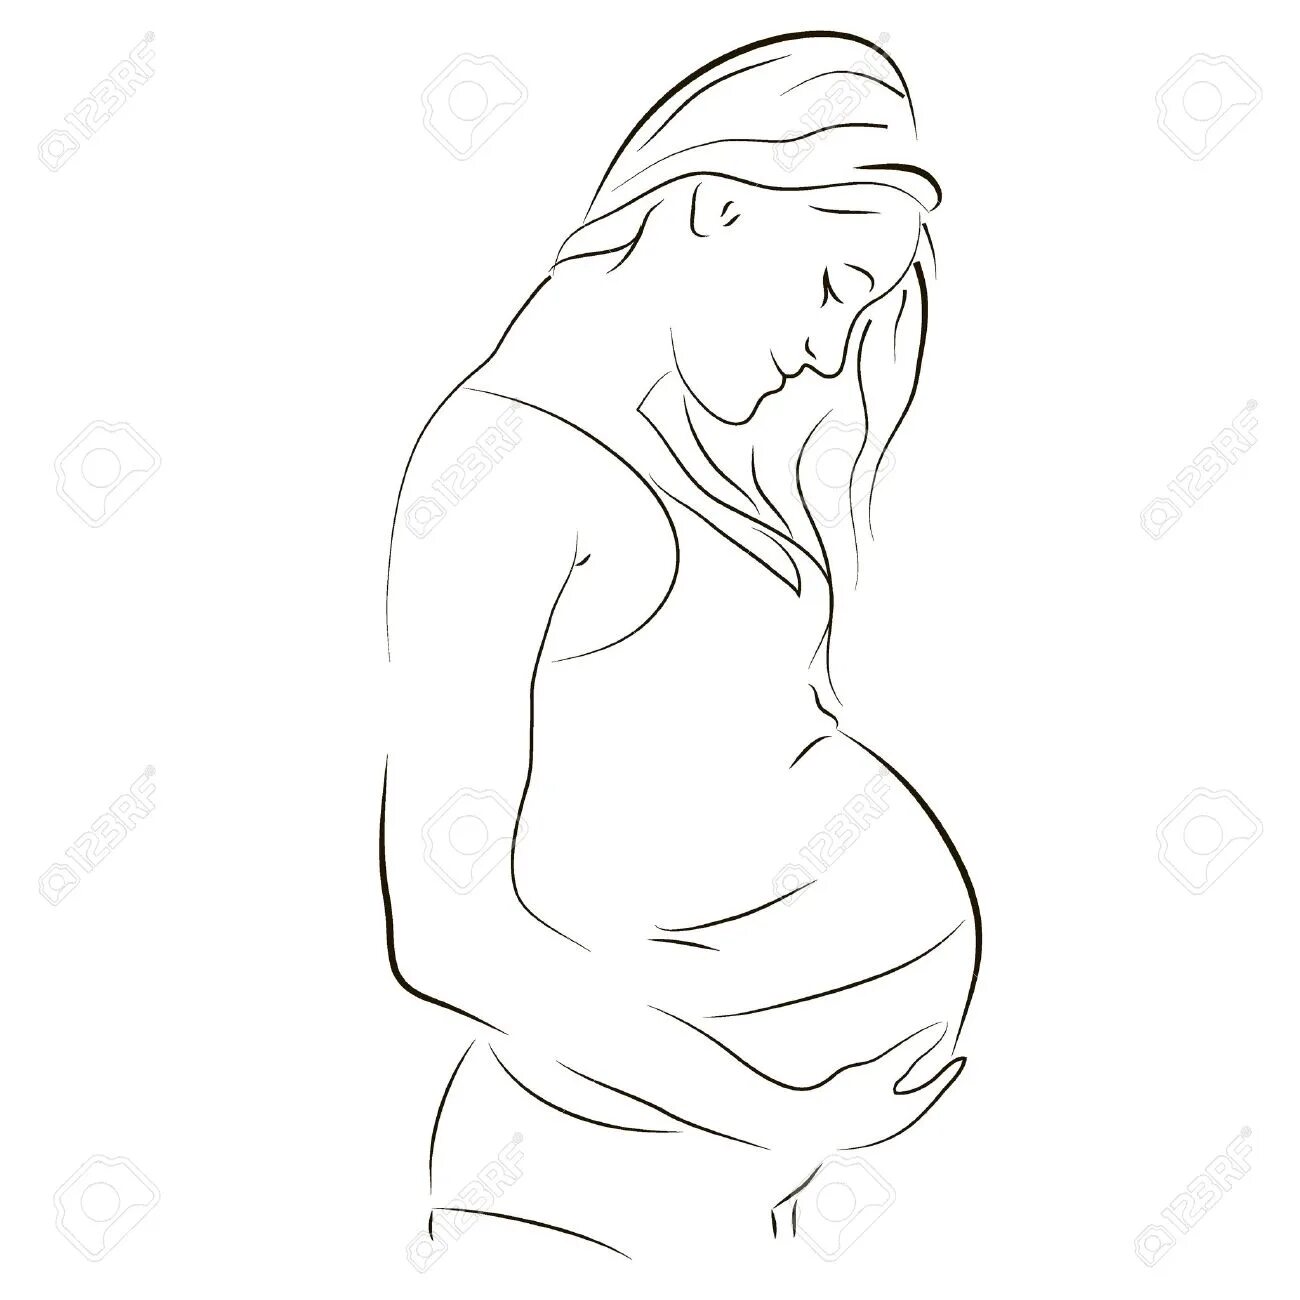 Coloring page adorable pregnant mom